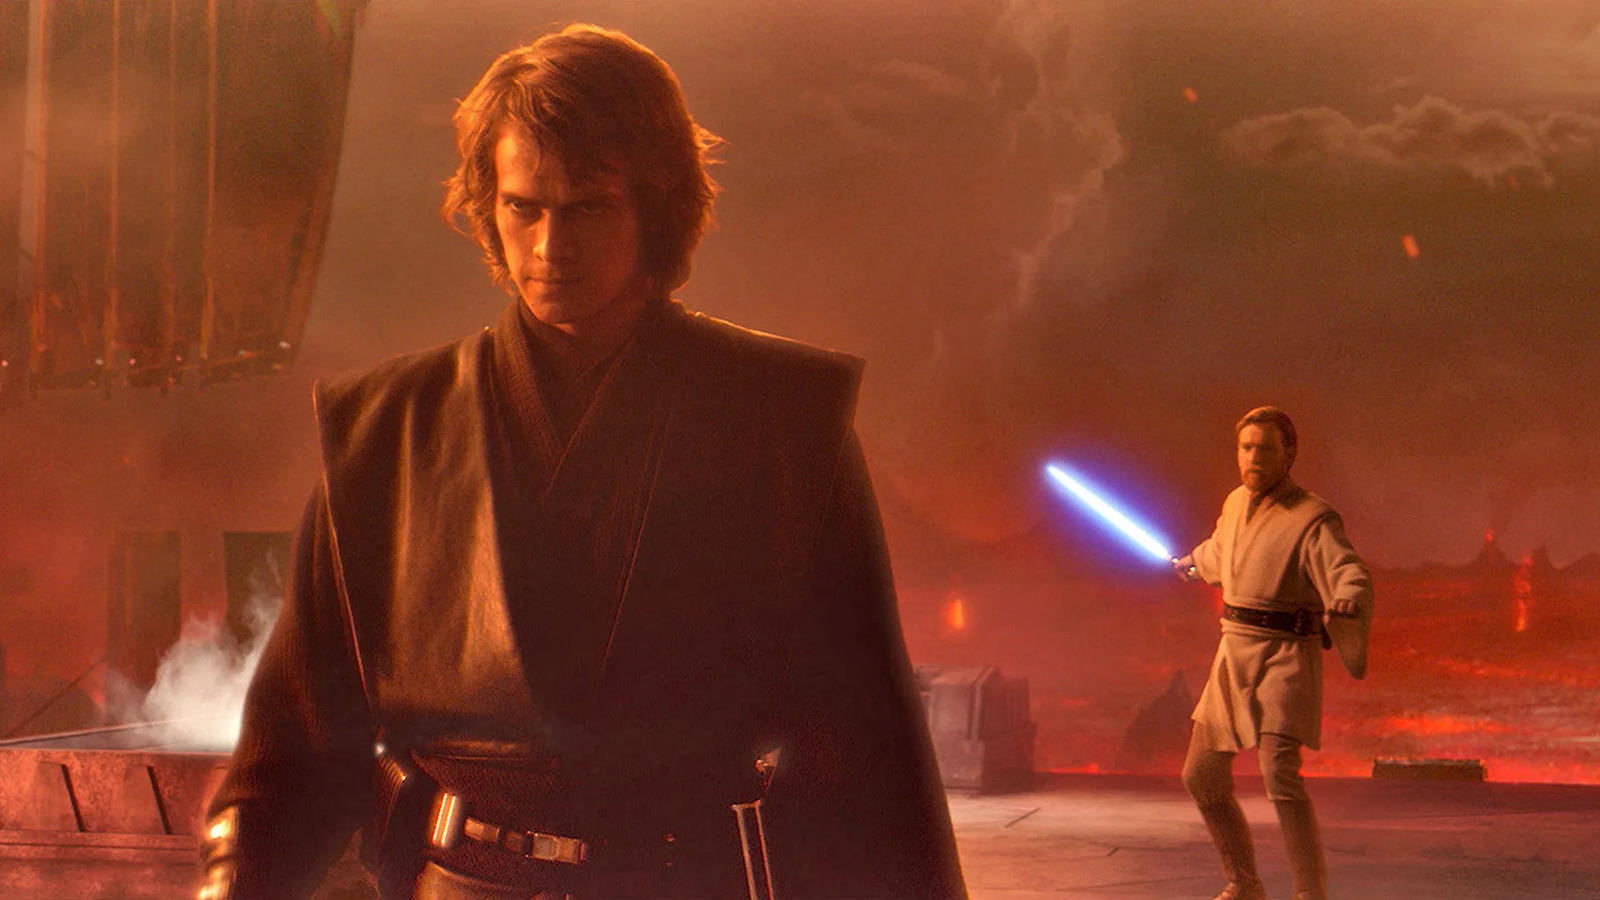 Star Wars Prequels' Stunt Coordinator Created A Scale Ranking Every Jedi & Sith's Strength